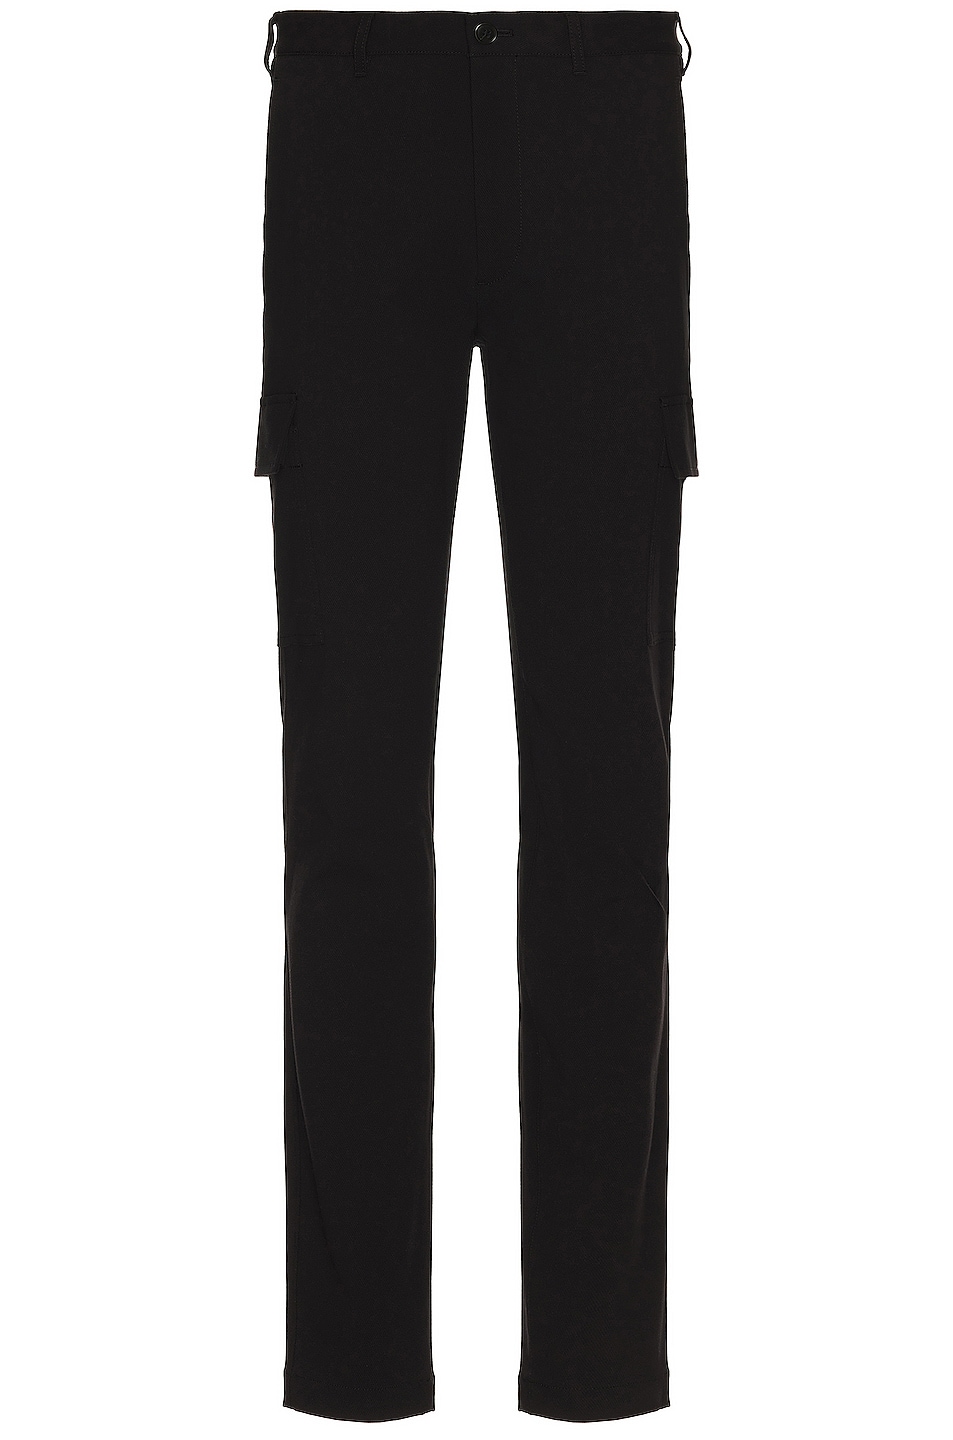 Theory Zaine Neoteric Twill Pants in Black | FWRD